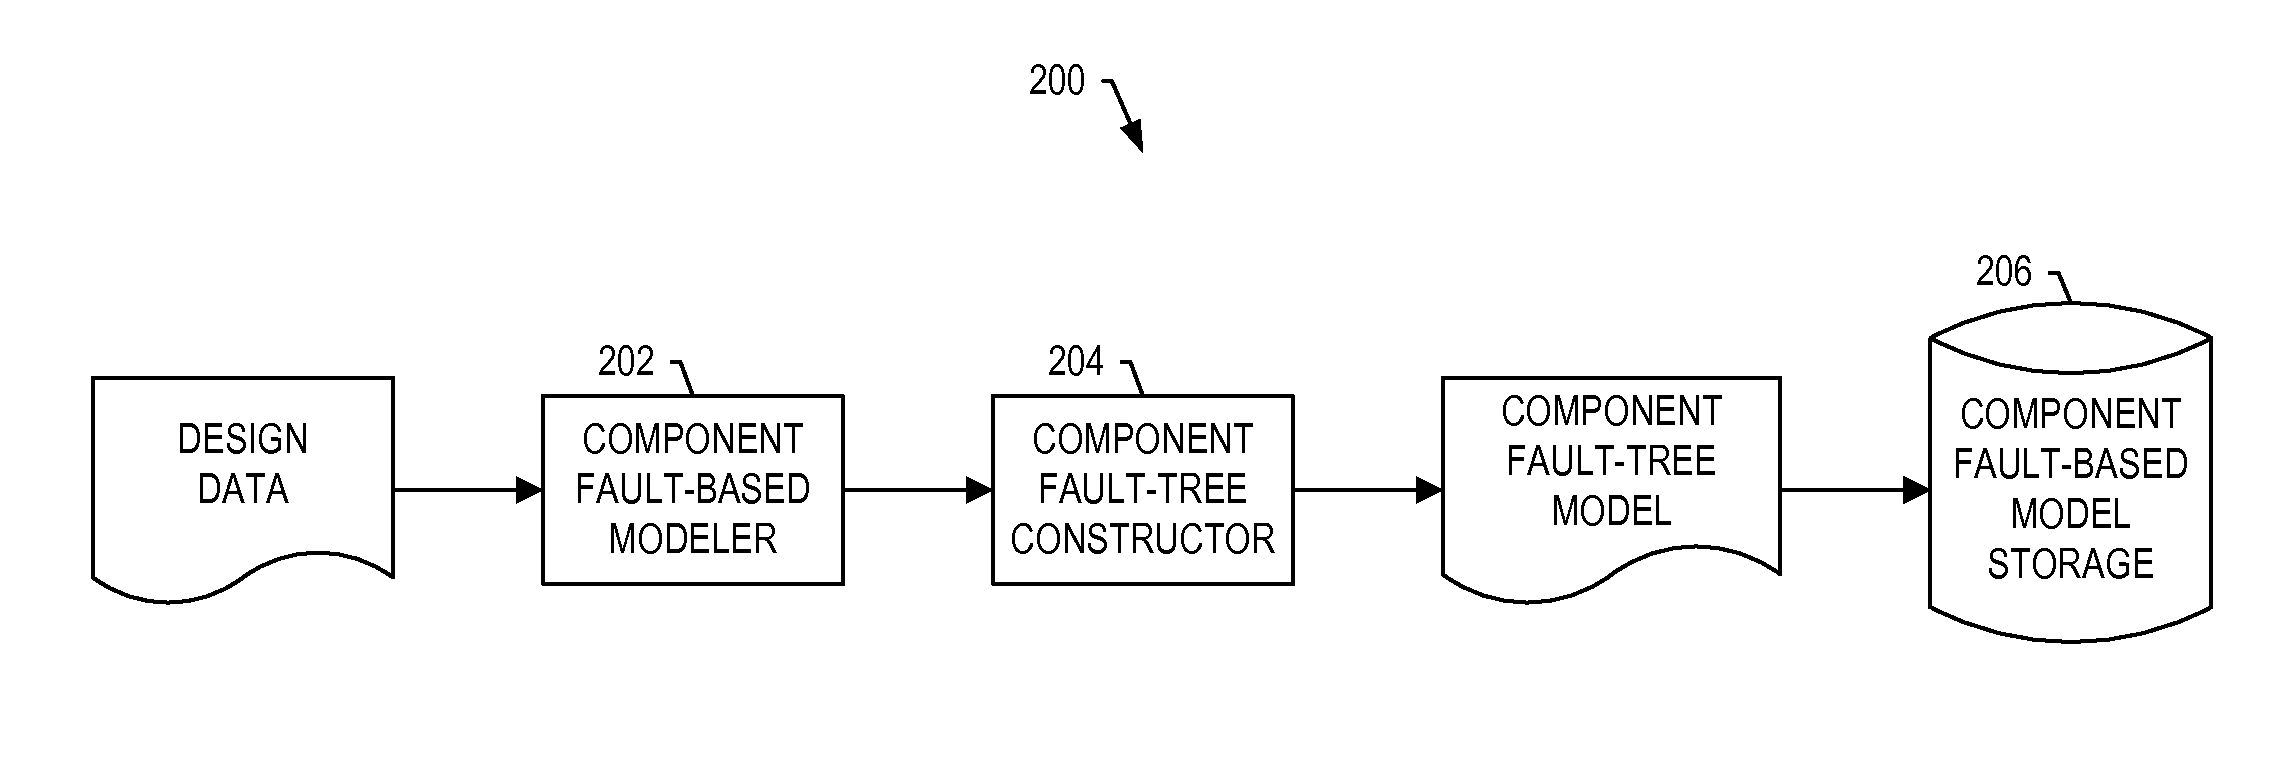 Safety analysis of a complex system using component-oriented fault trees